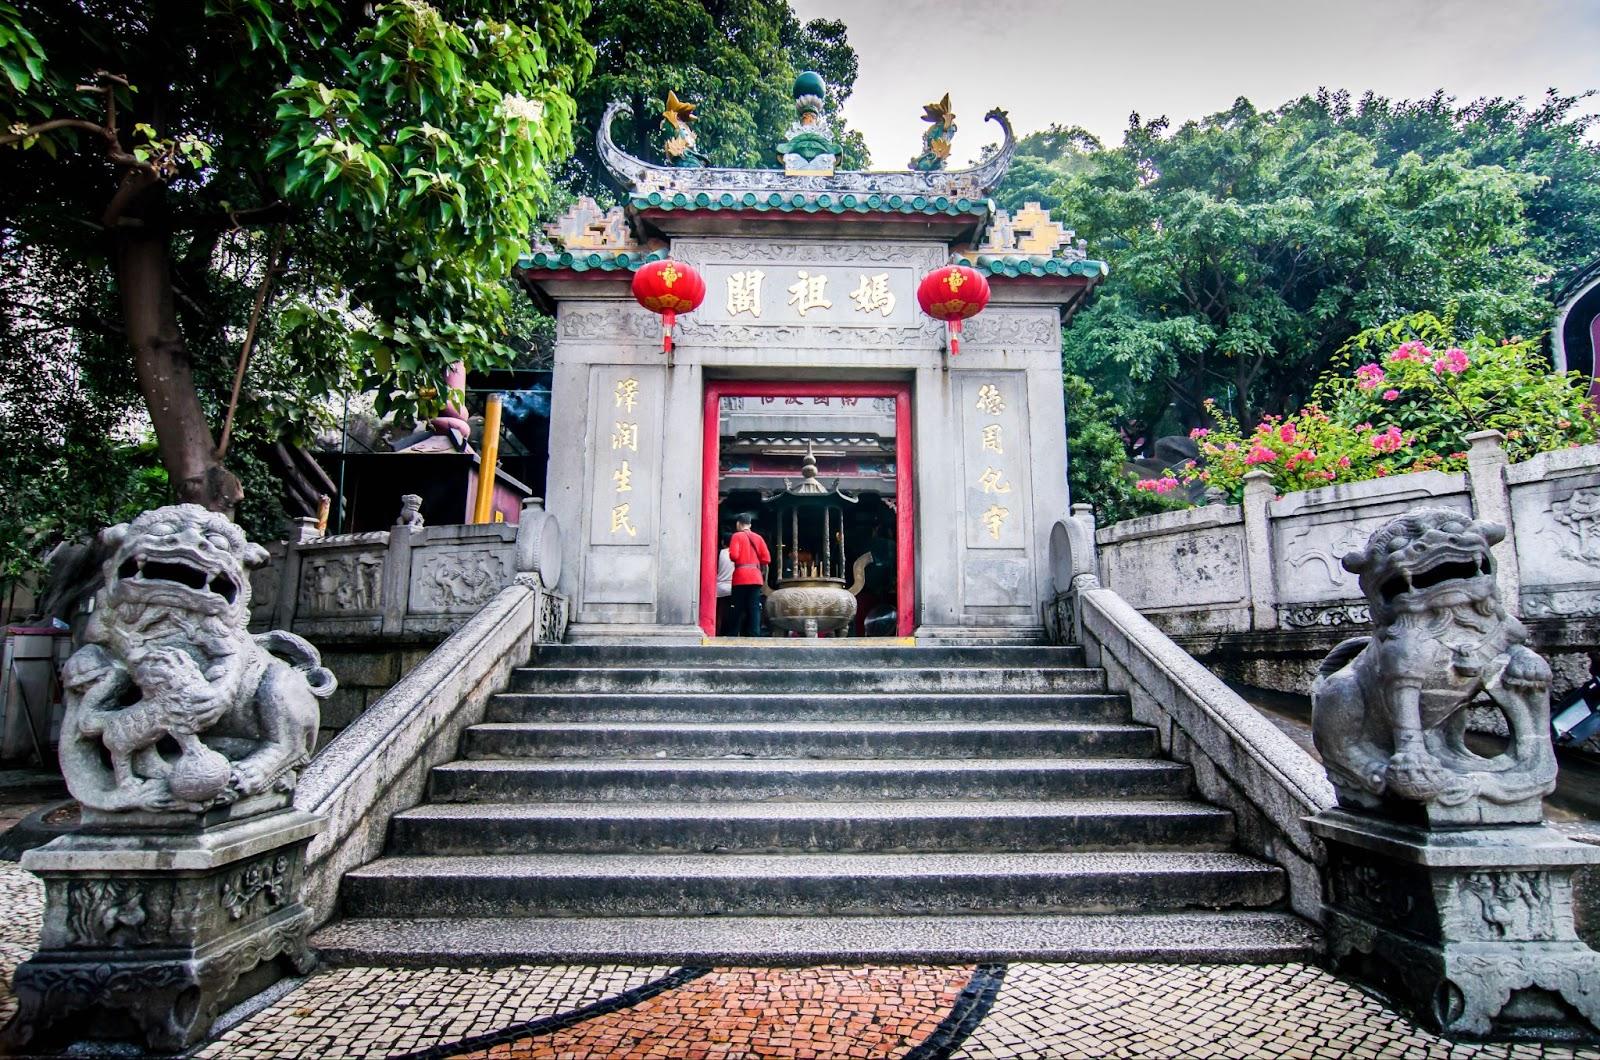 A-Ma Temple, situated on the southwest tip of the Macau Peninsula, is one of the oldest and most famous Taoist temples in Macau